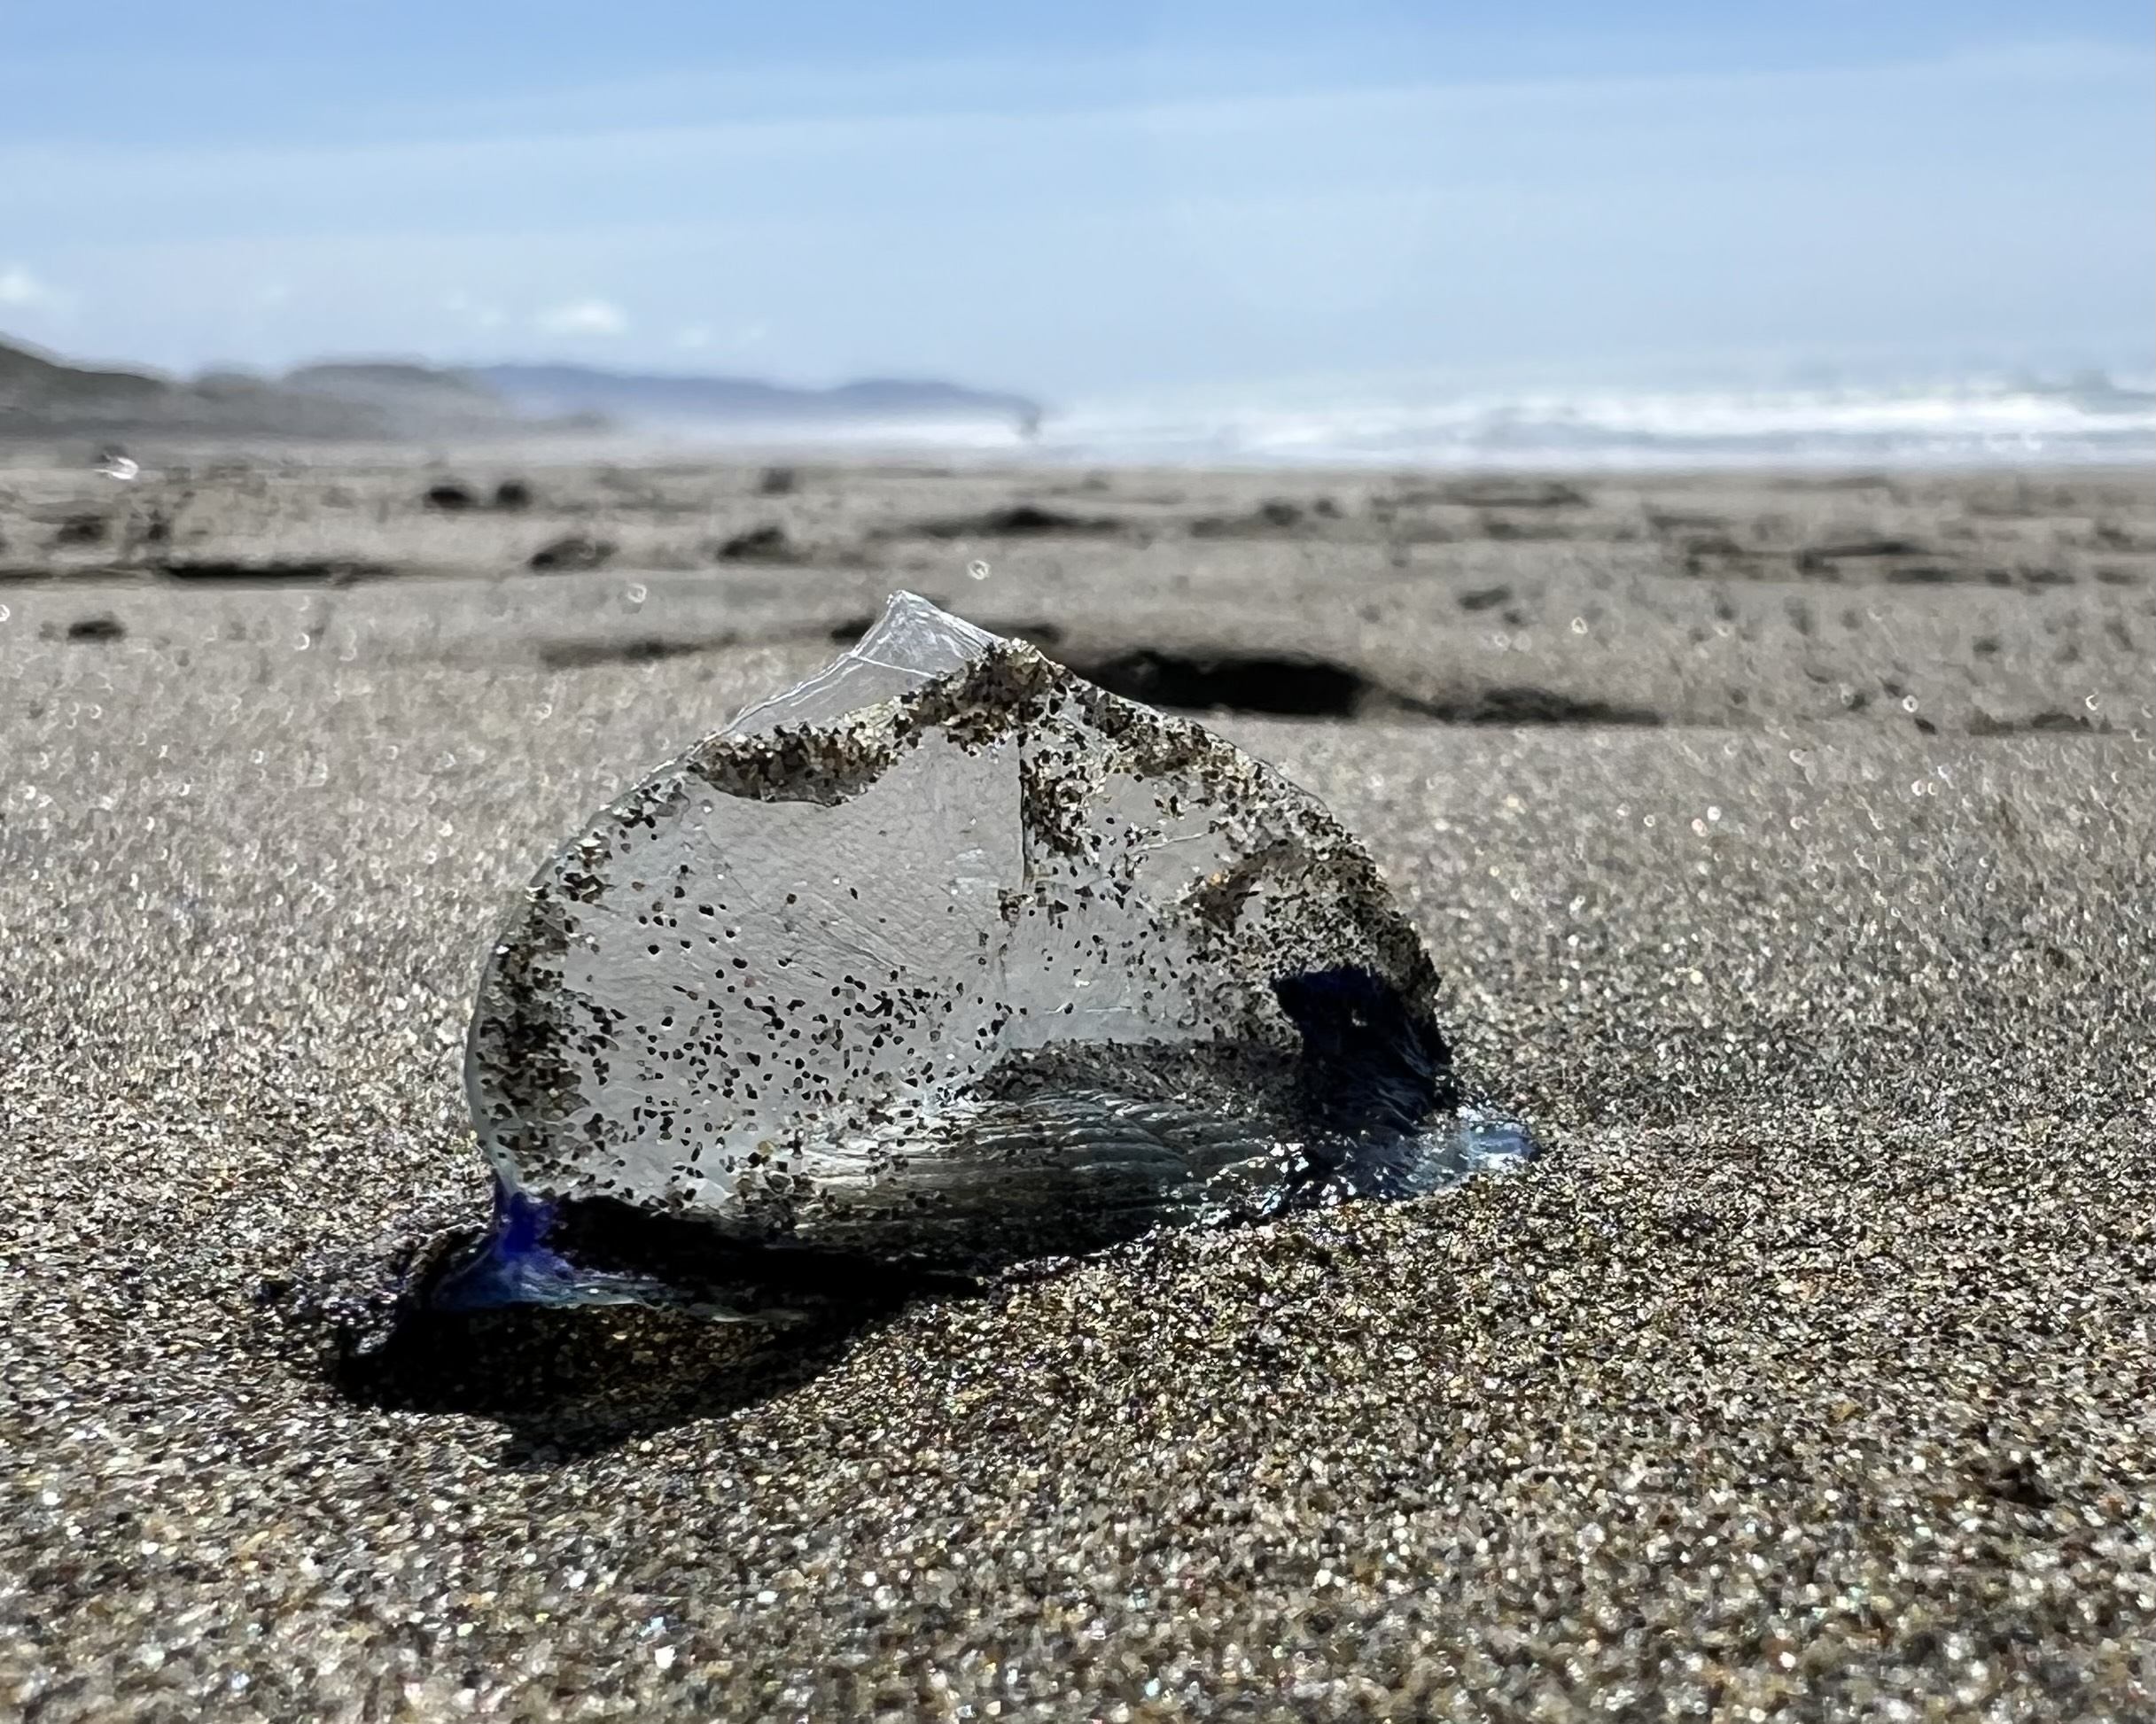 A translucent, gelatinous creature with sand particles is on a sandy beach with waves in the background.